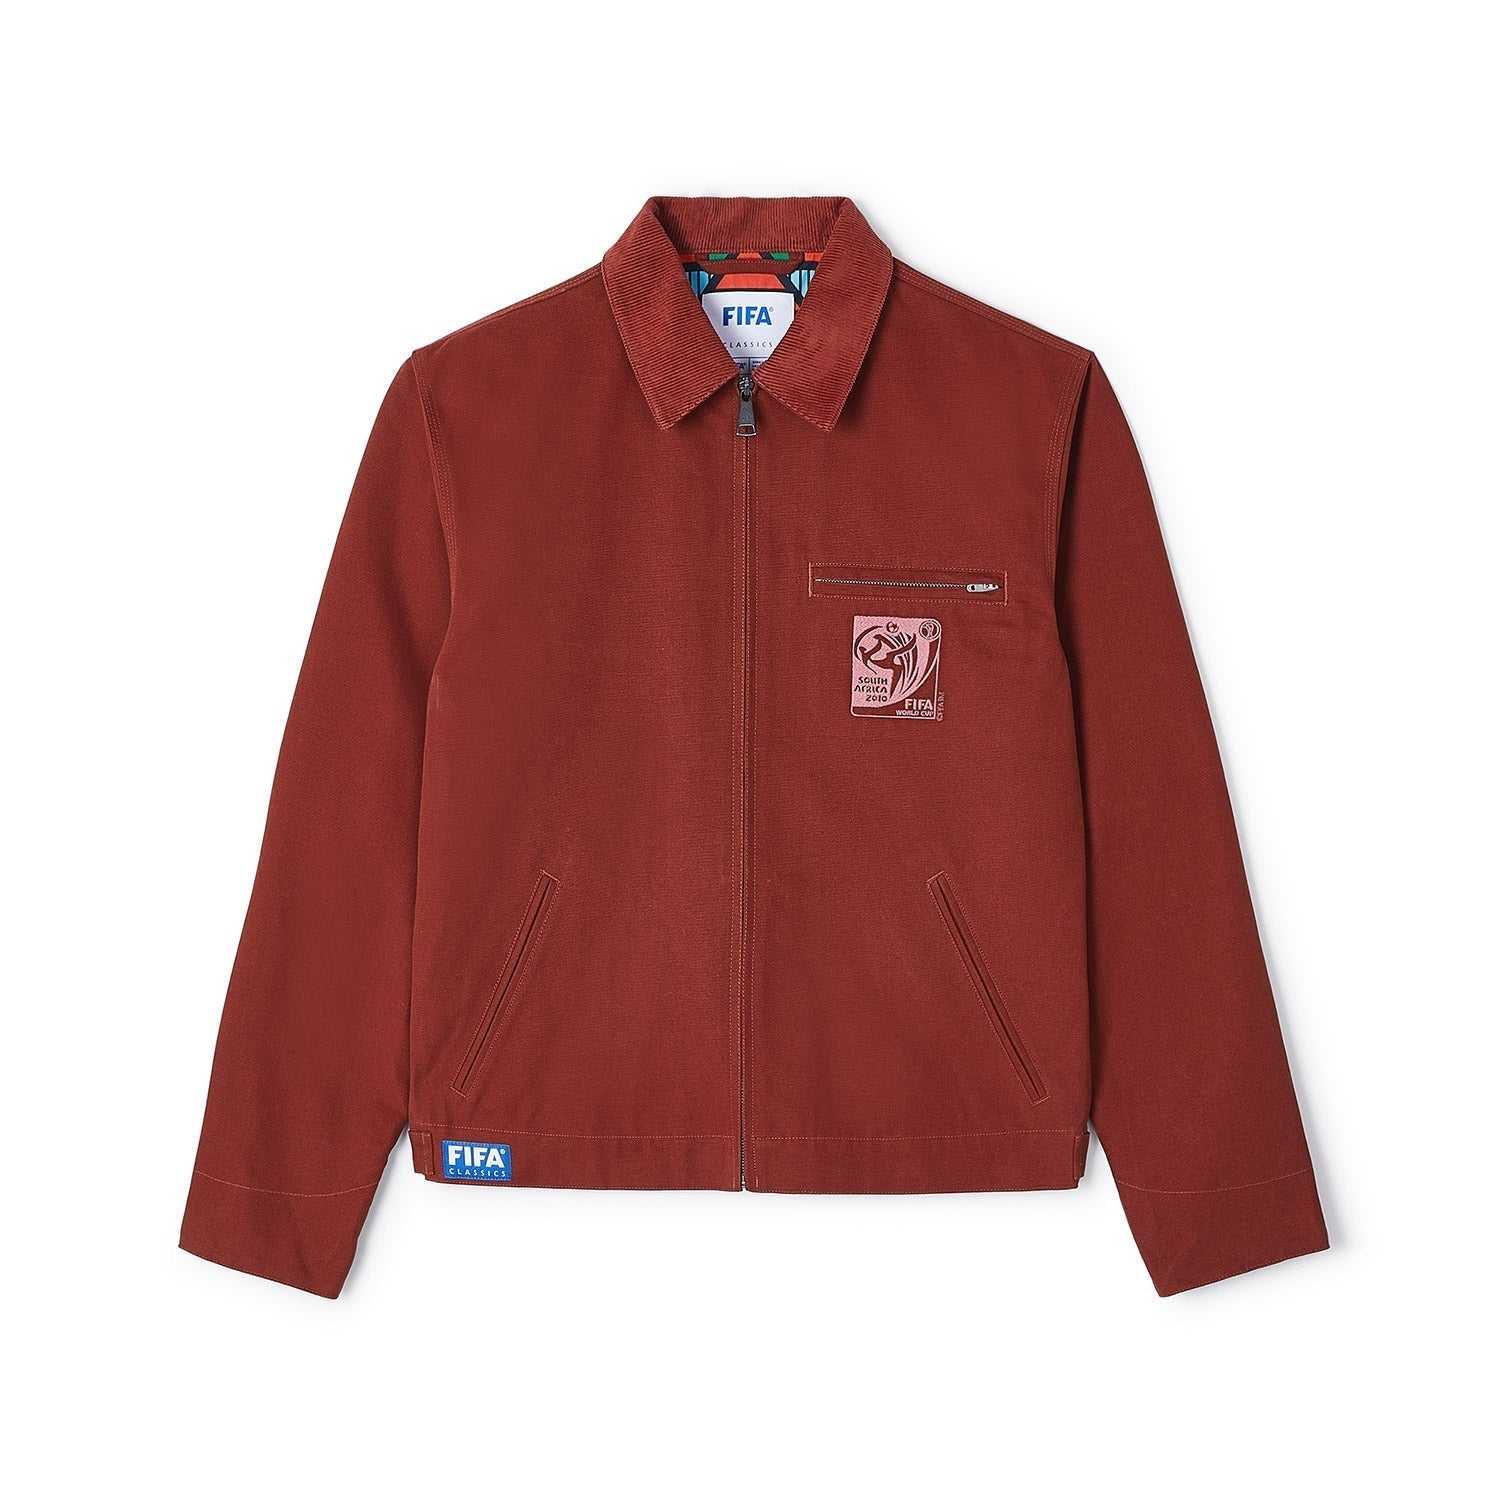 FIFA Classics South Africa '10 Jacket Red - Mens